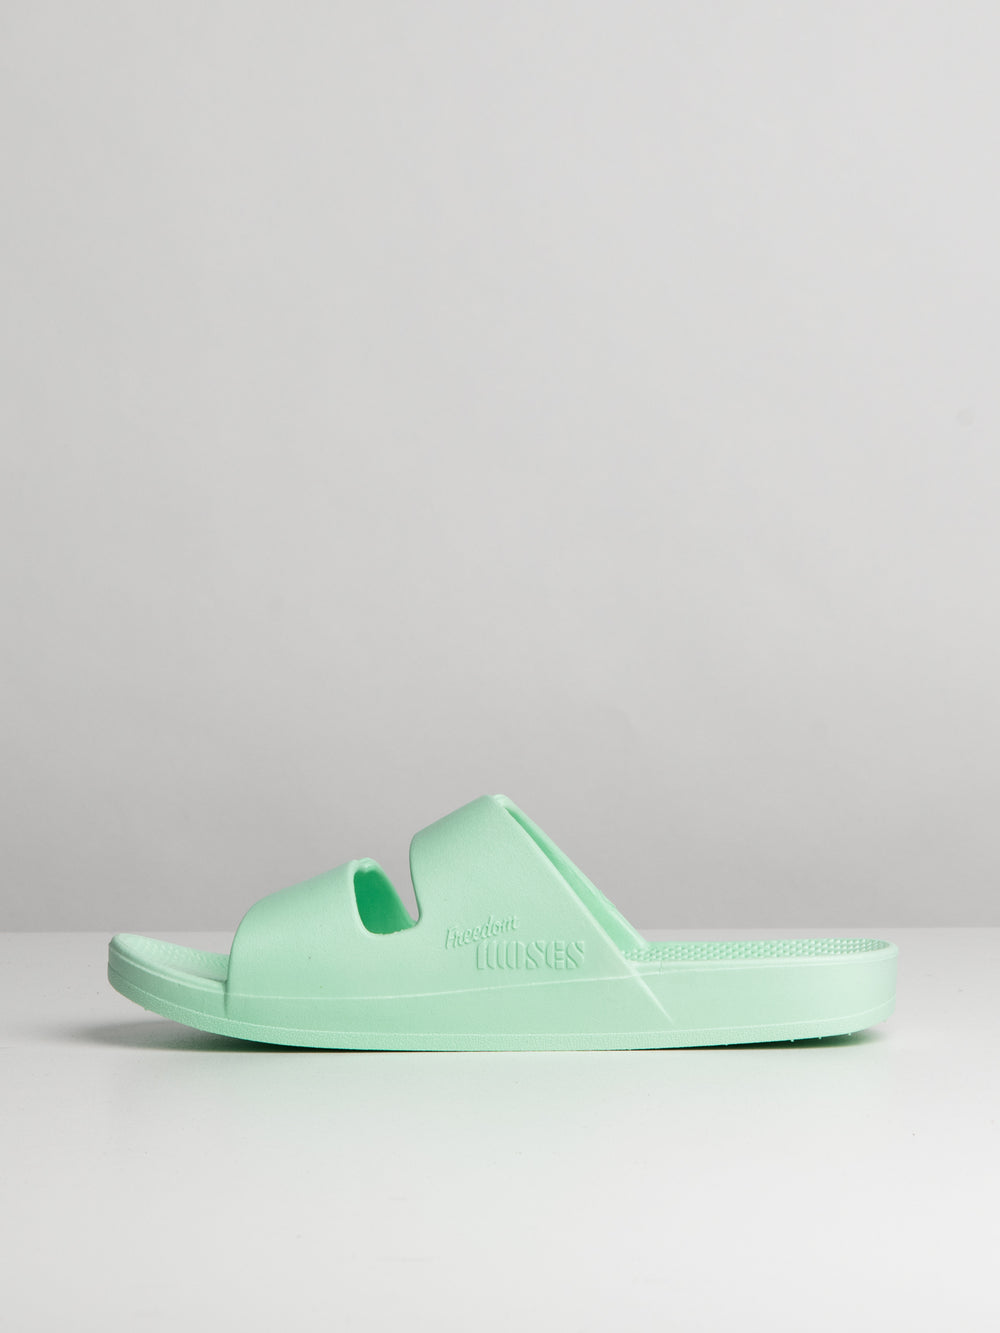 WOMENS FREEDOM MOSES MINT SANDAL  - CLEARANCE